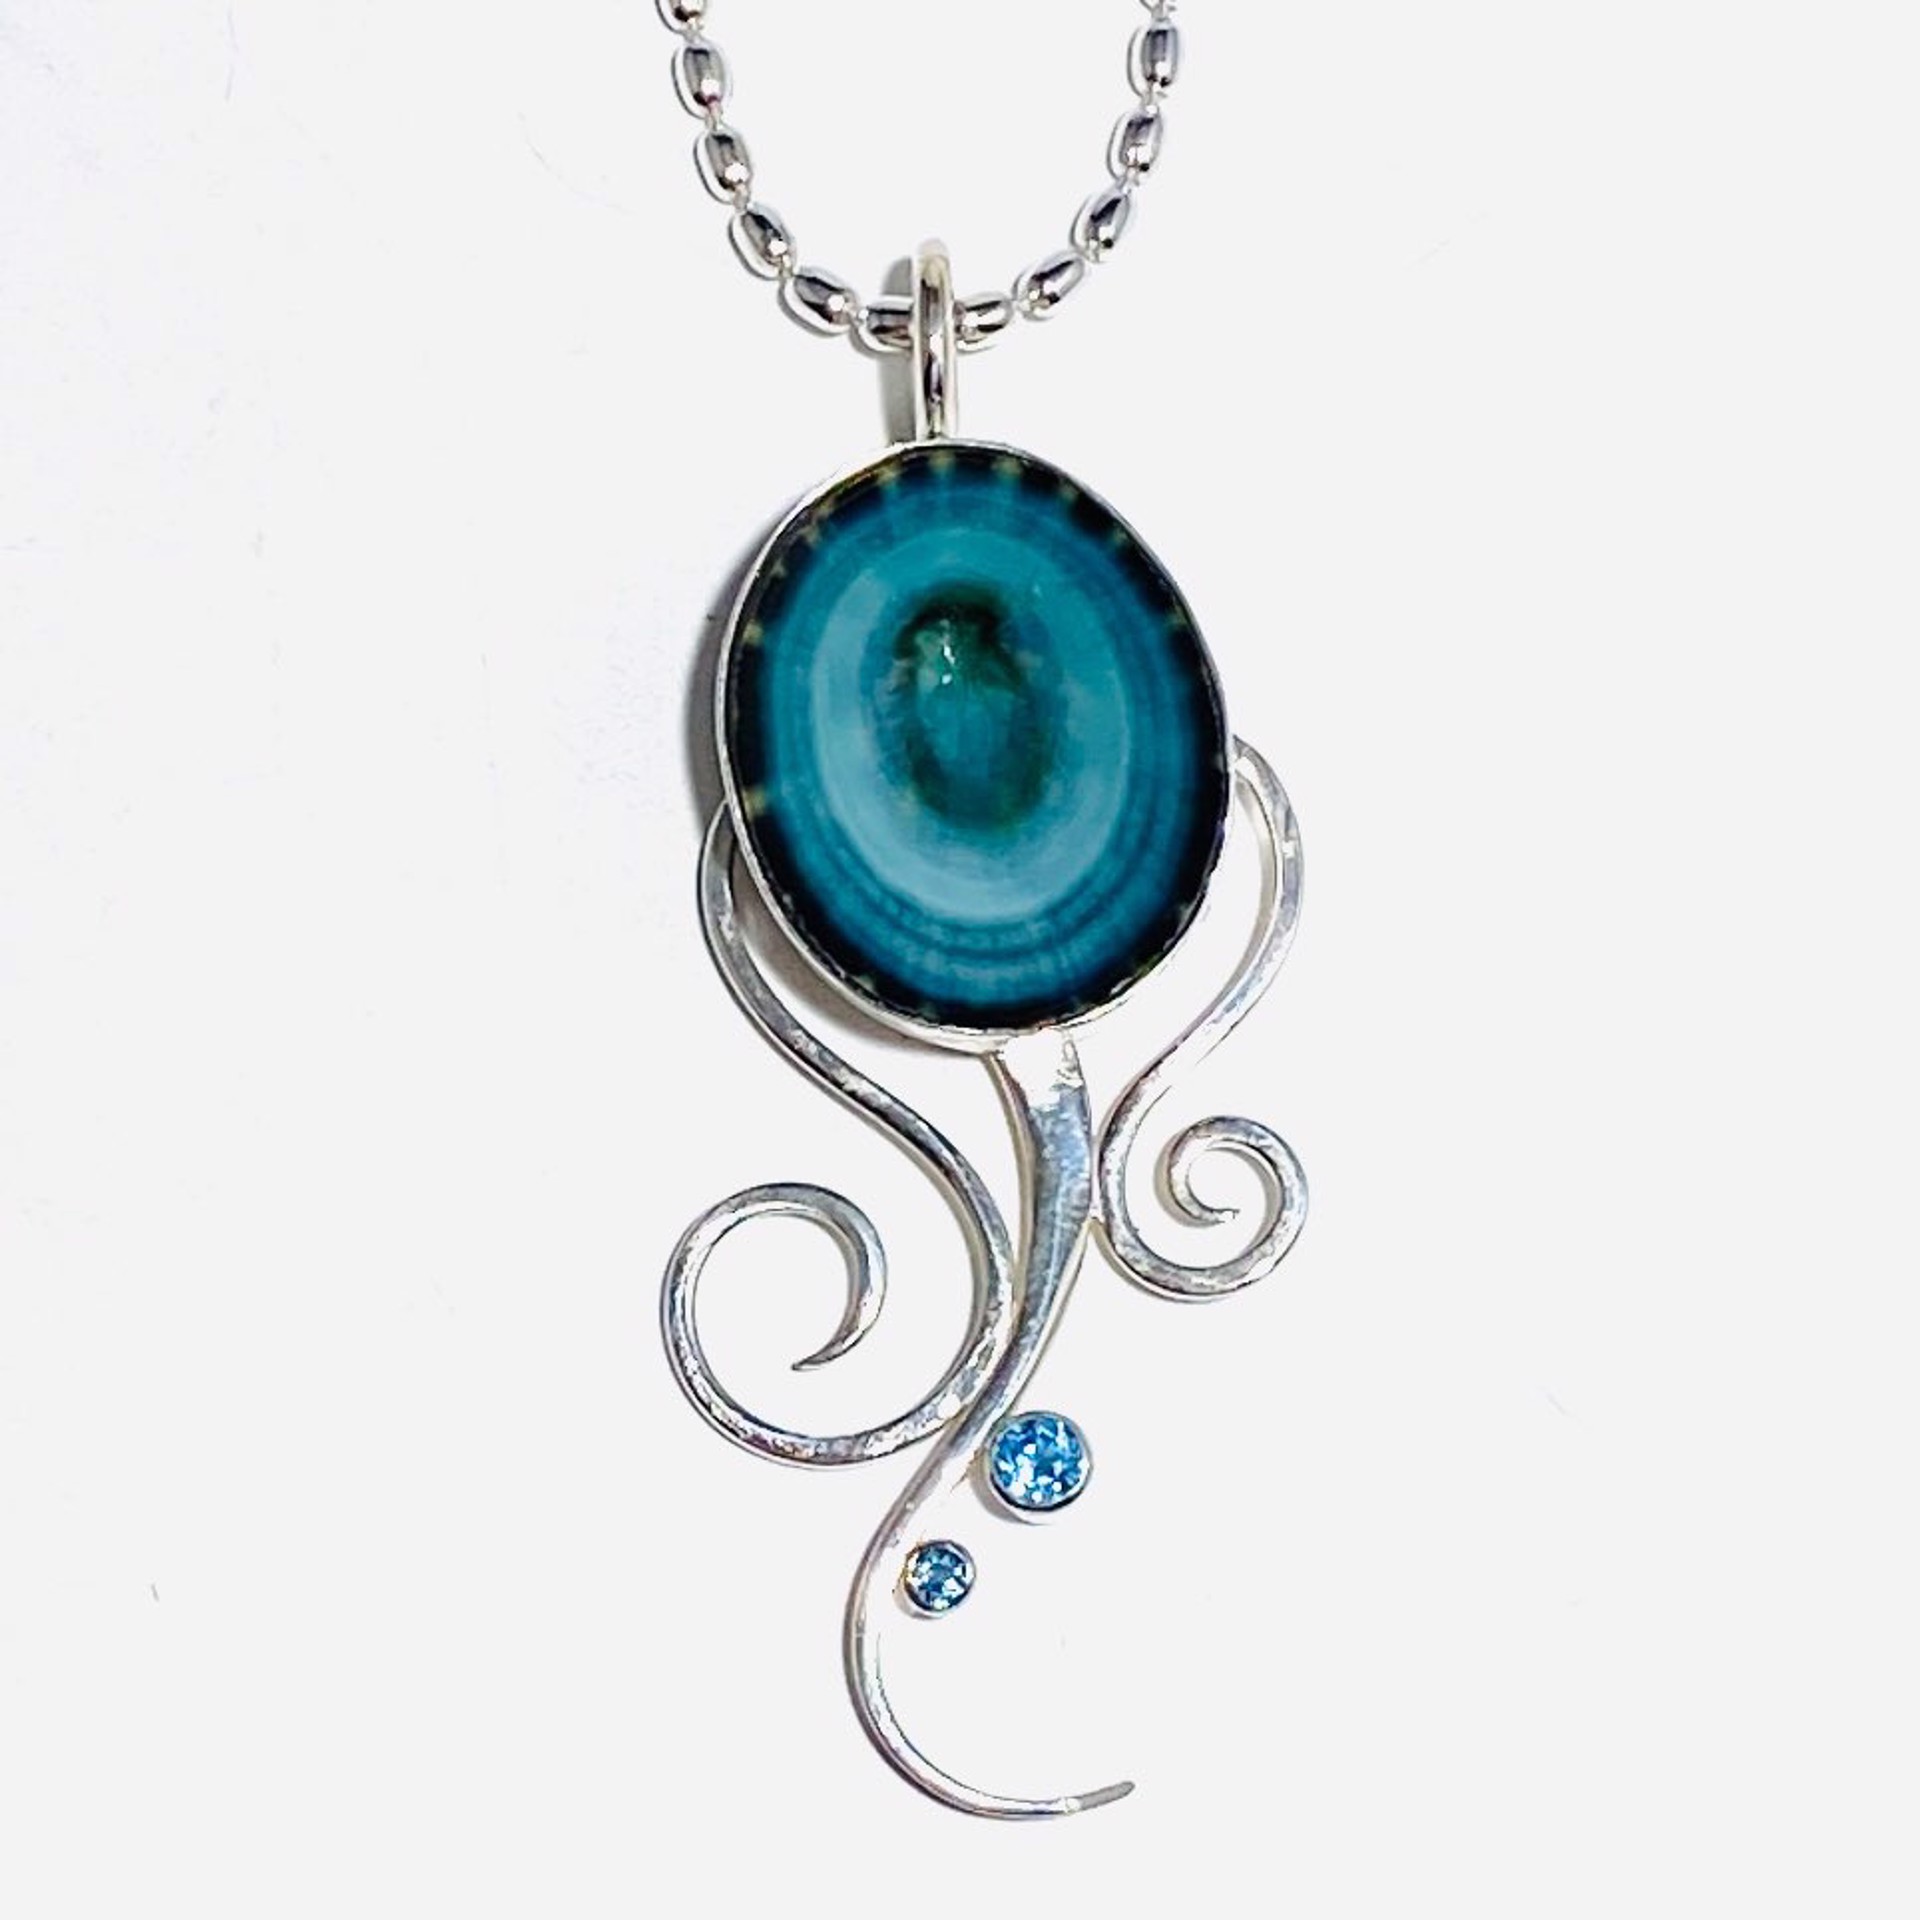 Pacific Coast Aqua Limpet, Swiss and London Blue Topaz Jellyfish Pendant on 18”Silver Rice Chain Necklace BU23-21 by Barbara Umbel